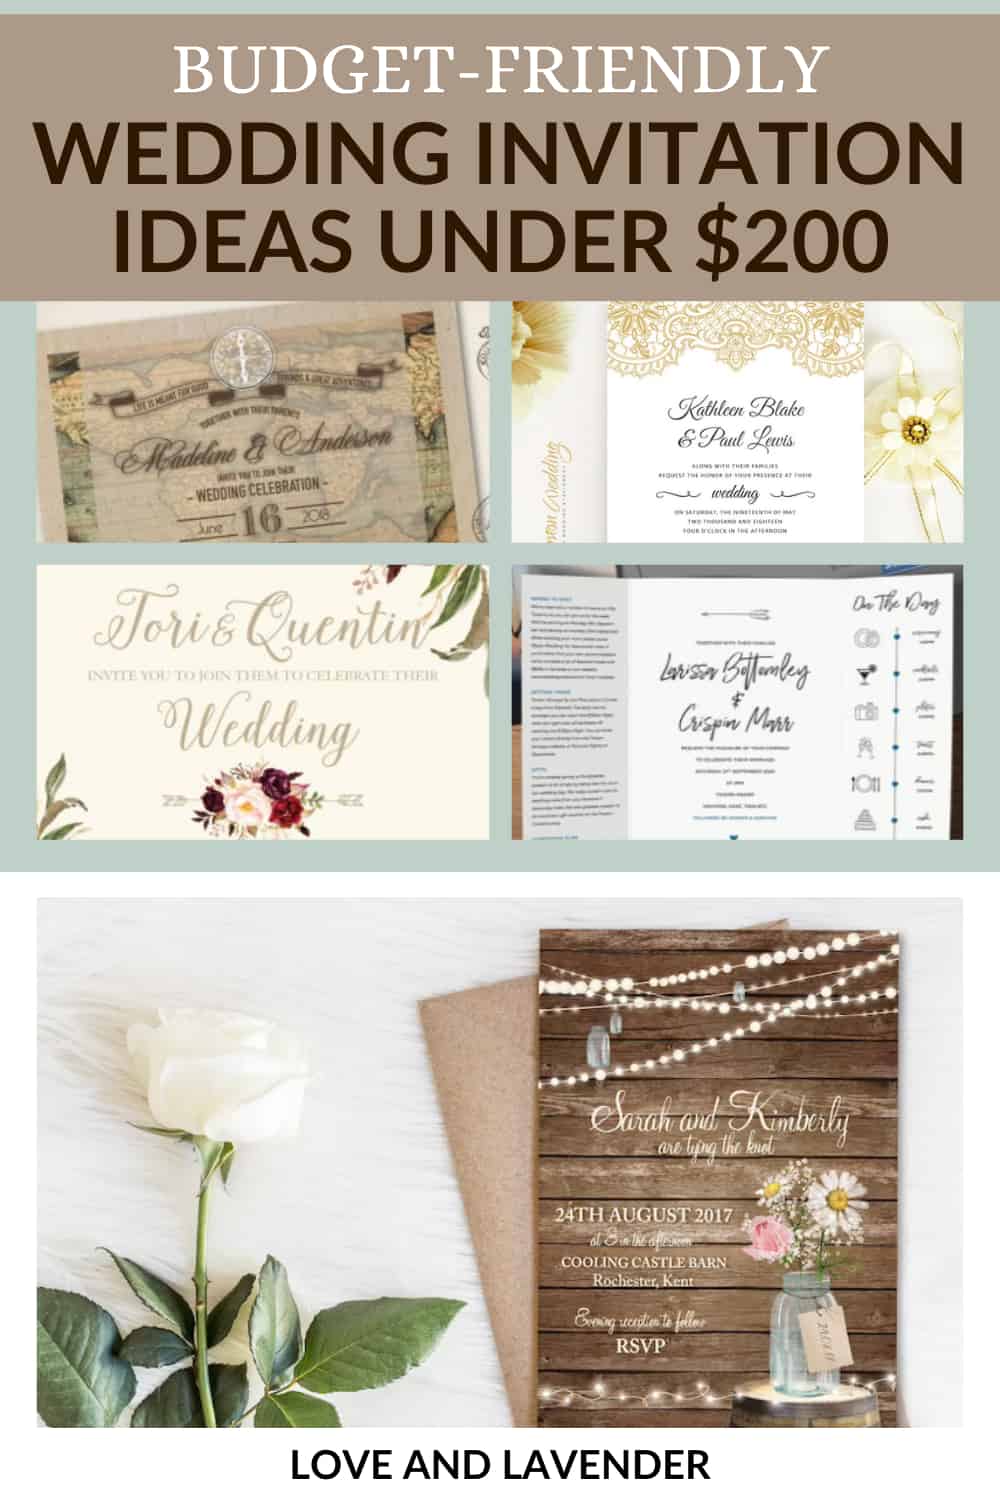 How to Buy Wedding Invitations with a $200 Budget - Pinterest pin